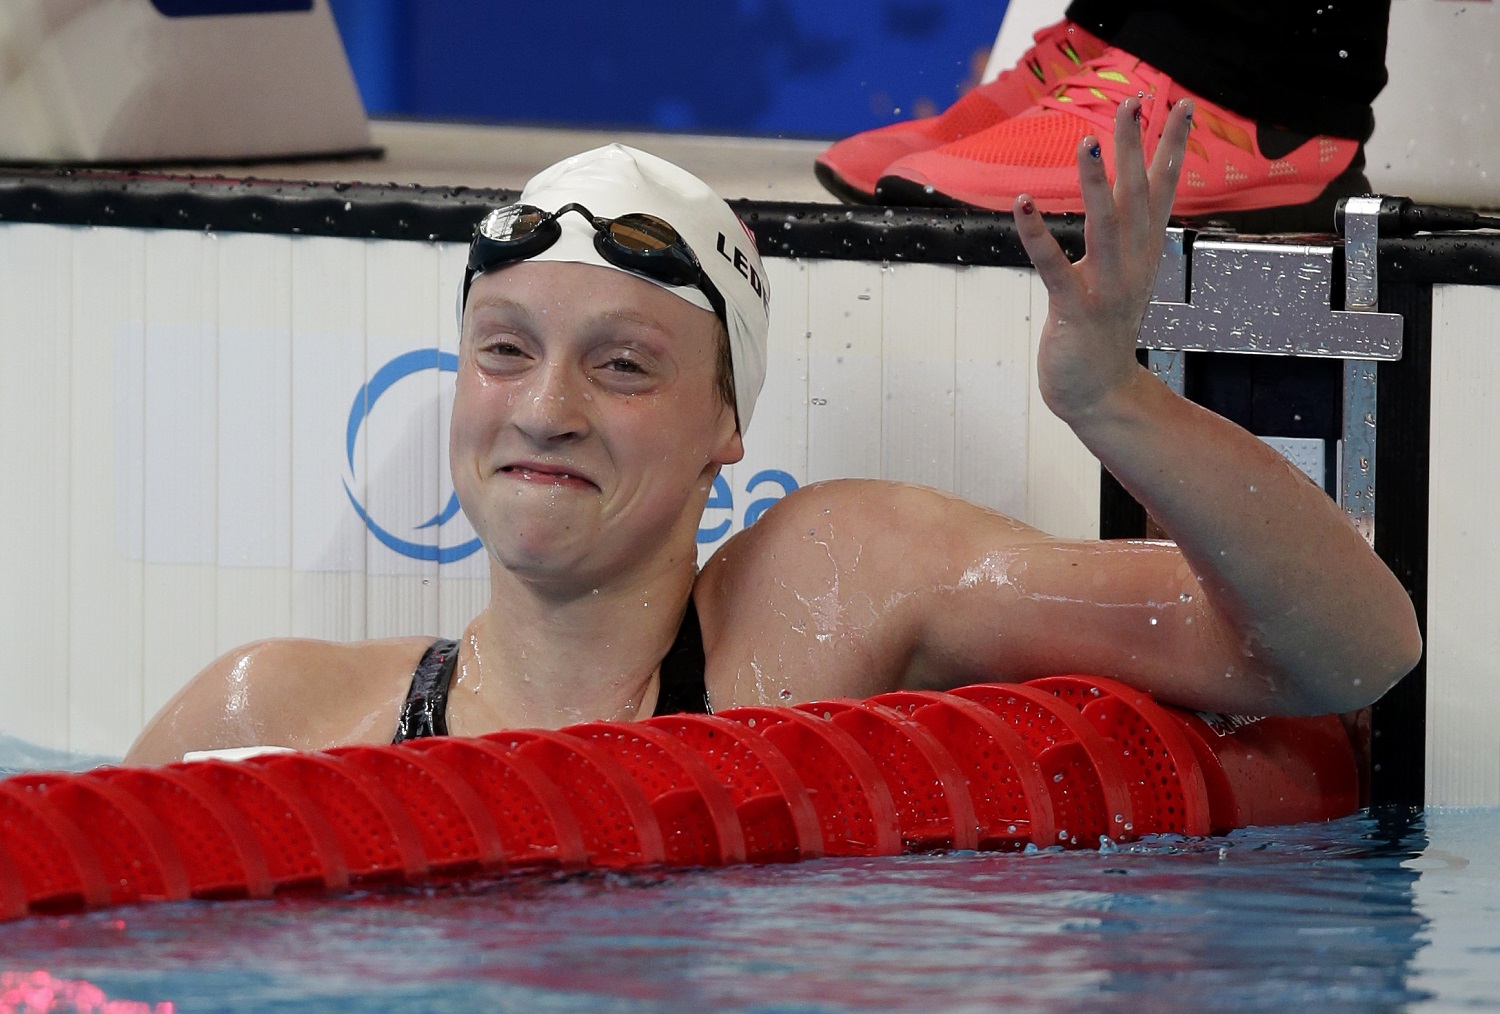 United State's Katie Ledecky celebrates after setting a world record during her heat in the women's 1500m at the Swimming World Championships in Kazan, Russia, Monday, Aug. 3, 2015. (AP Photo/Michael Sohn)